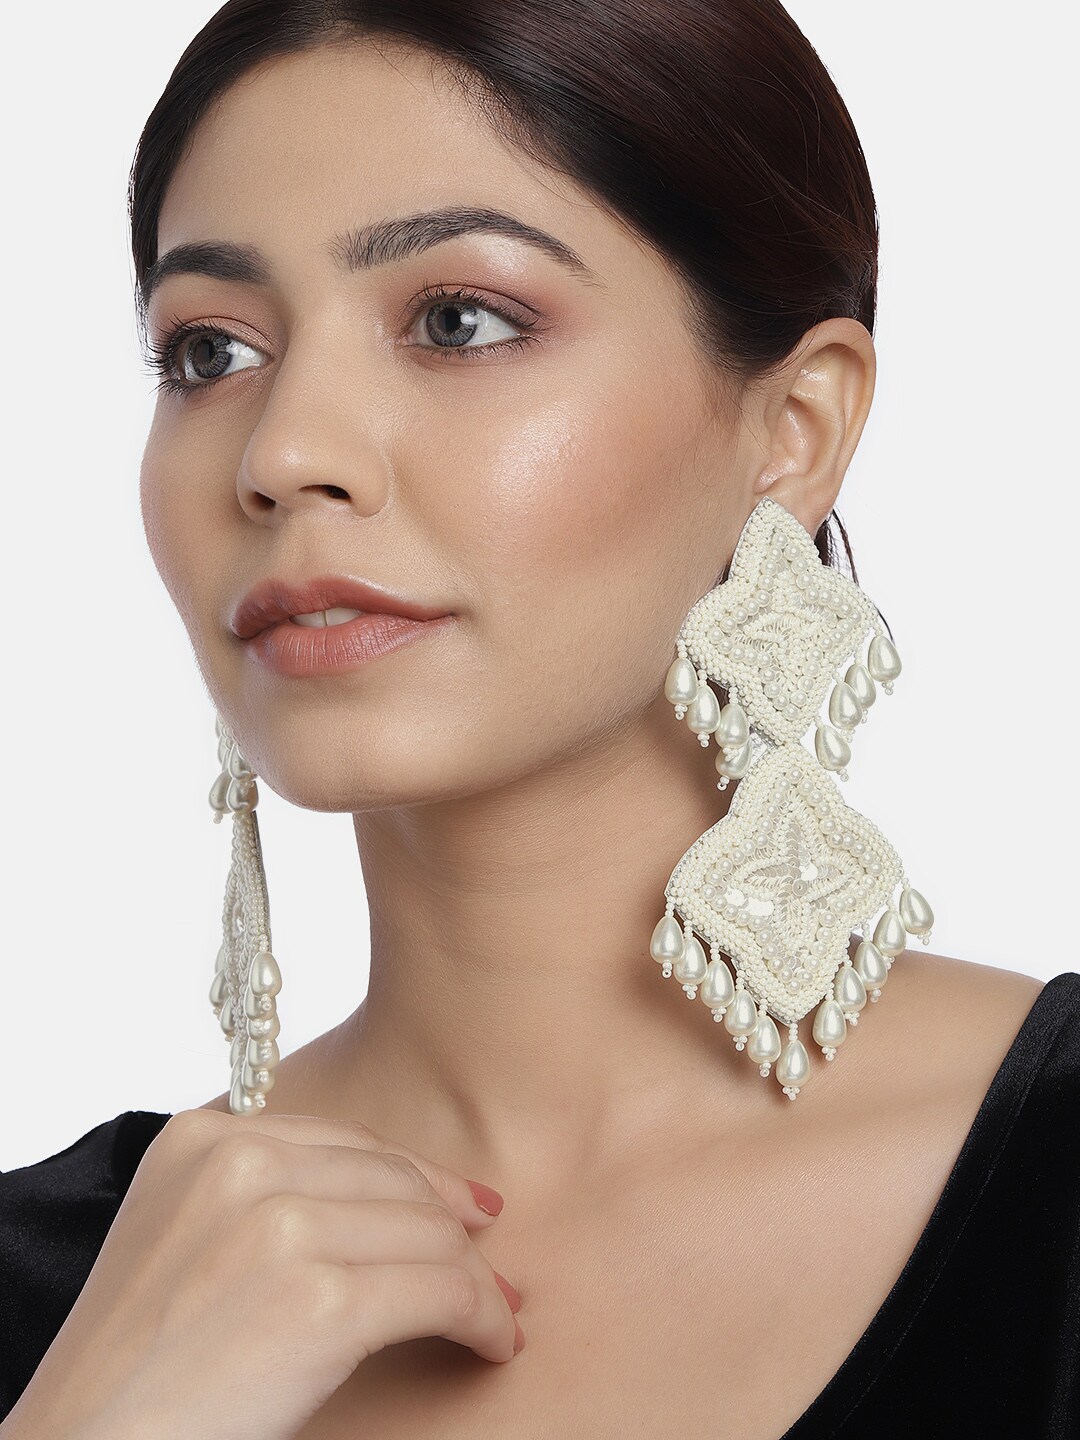 justpeachy Off-White Beads Studded Handcrafted Contemporary Drop Earrings